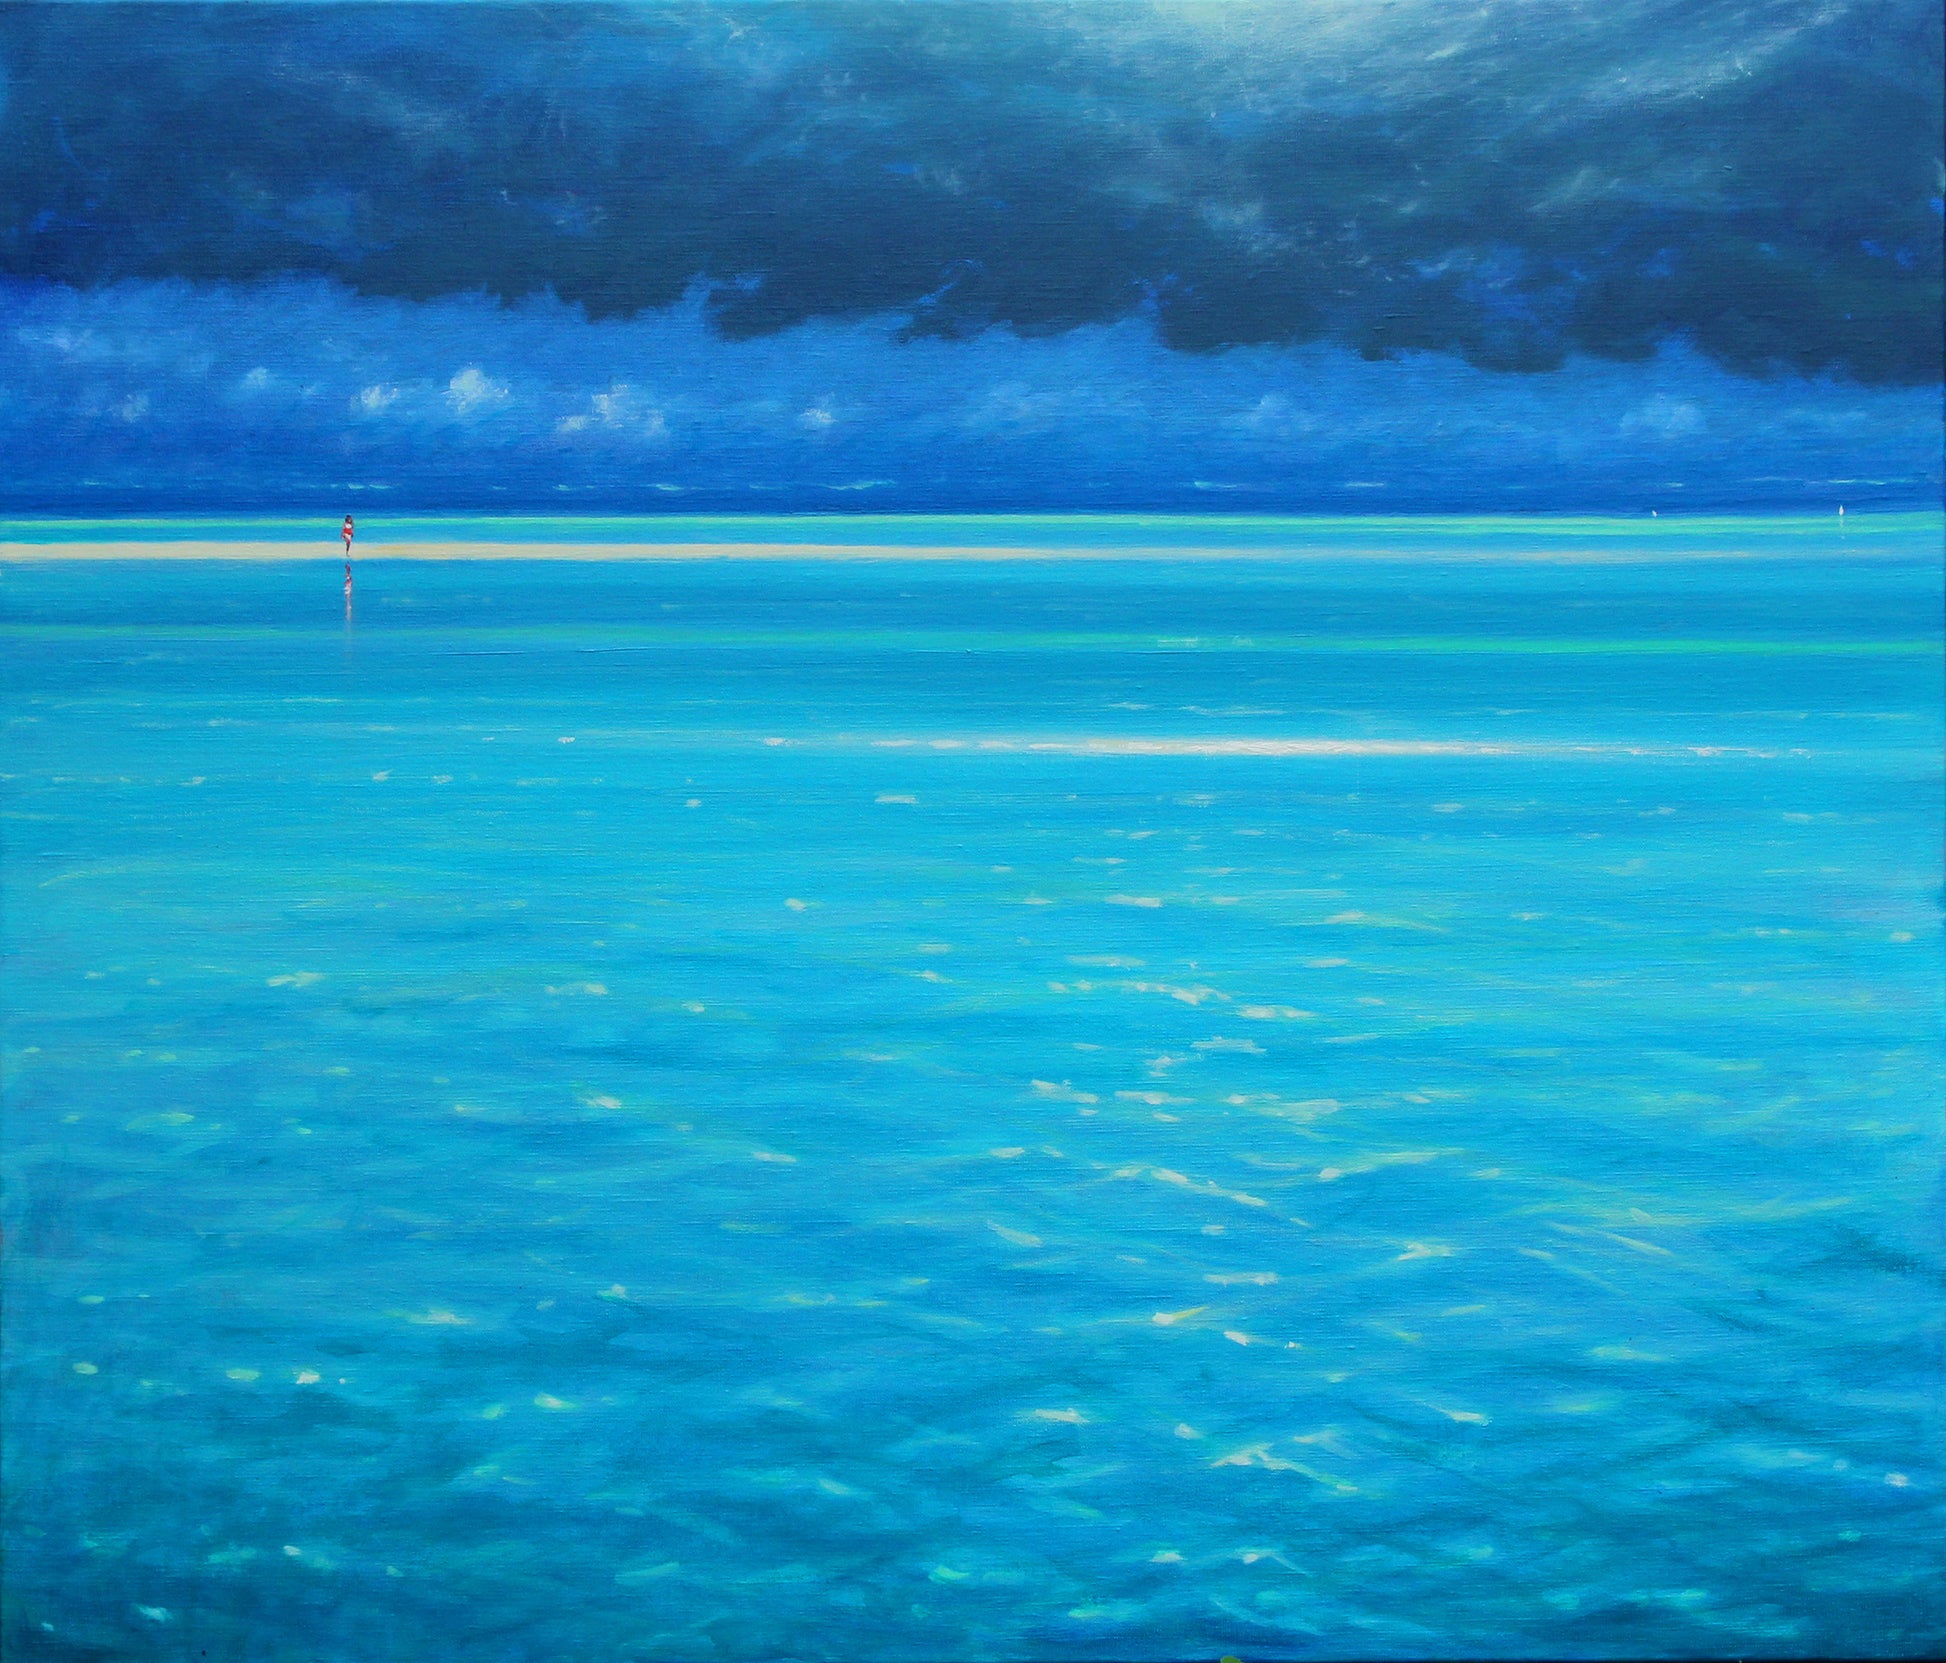 Dreams Of Paradise. 2020.42ins x 36ins. Seascape painting by Derek Hare